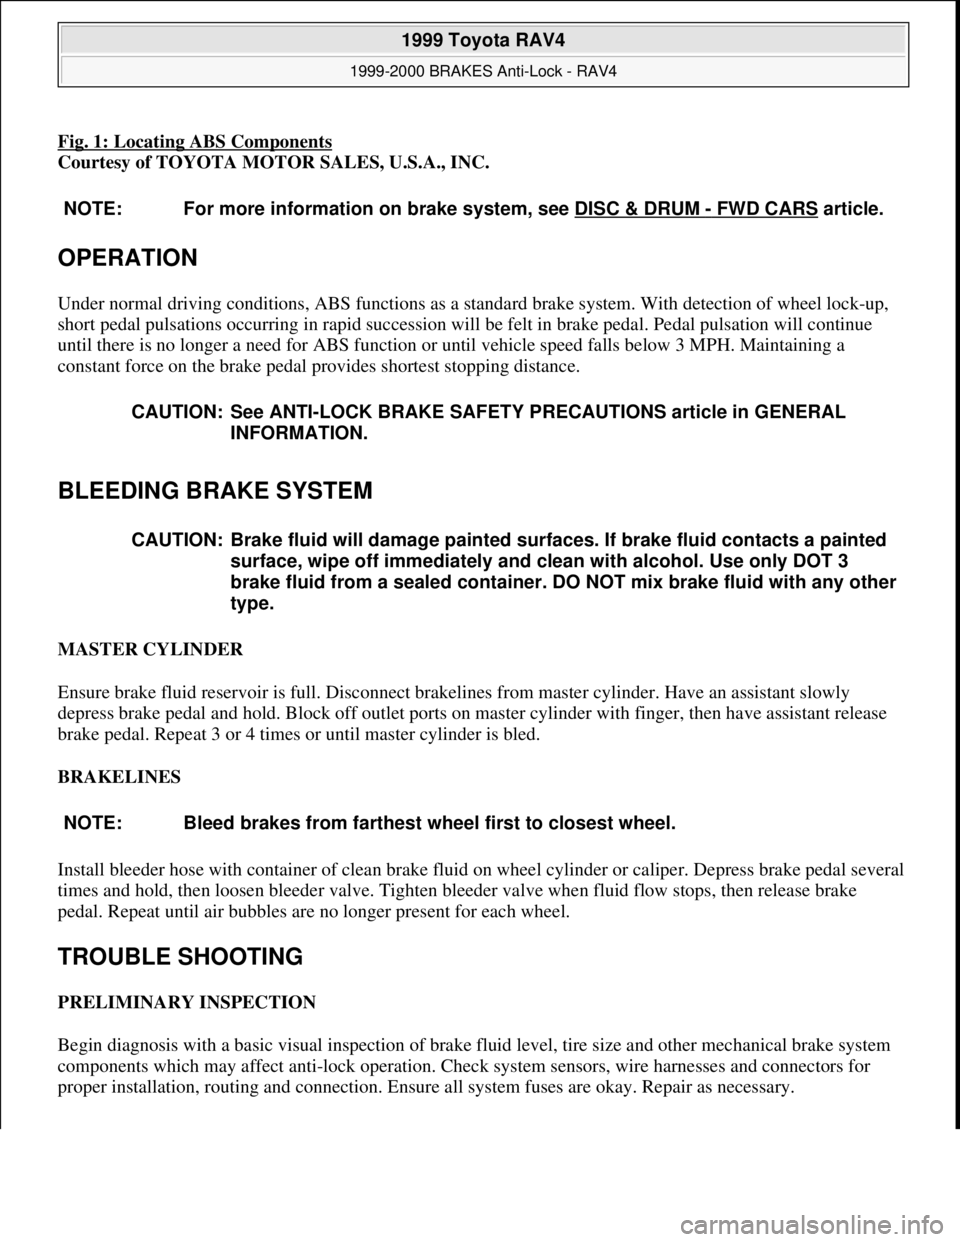 TOYOTA RAV4 1996  Service Repair Manual Fig. 1: Locating ABS Components 
Courtesy of TOYOTA MOTOR SALES, U.S.A., INC. 
OPERATION 
Under normal driving conditions, ABS functions as a standard brake system. With detection of wheel lock-up, 
s